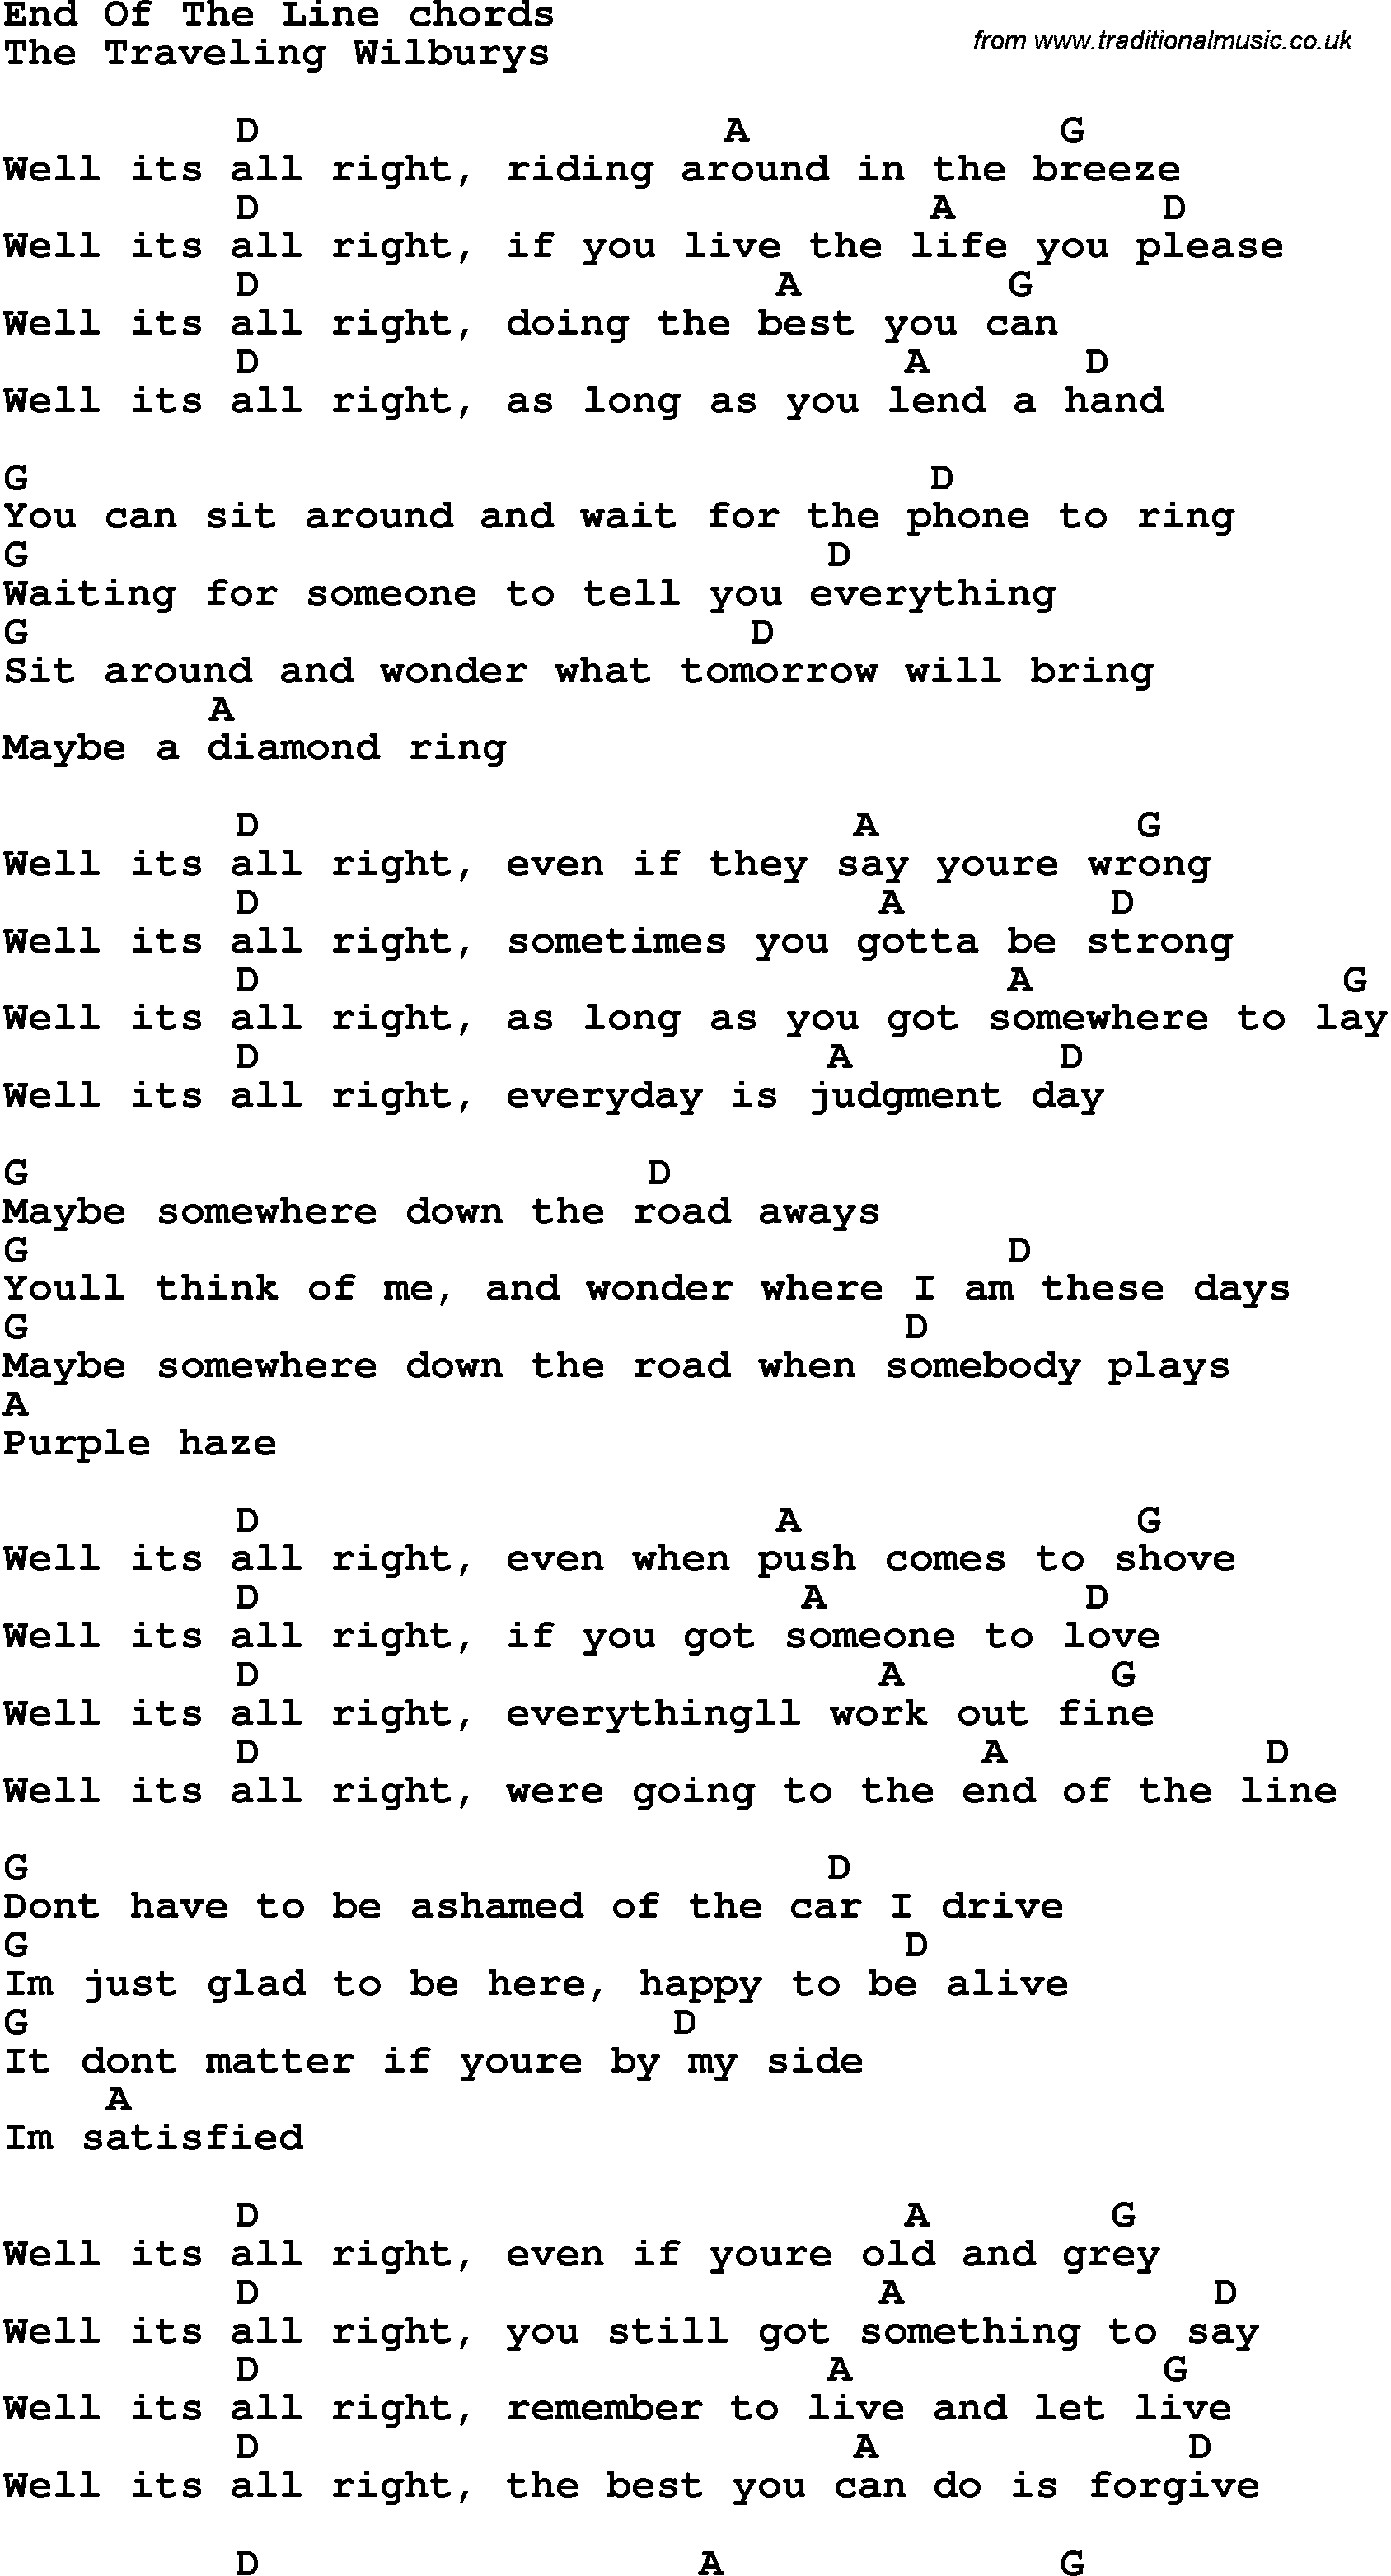 Song Lyrics with guitar chords for End Of The Line